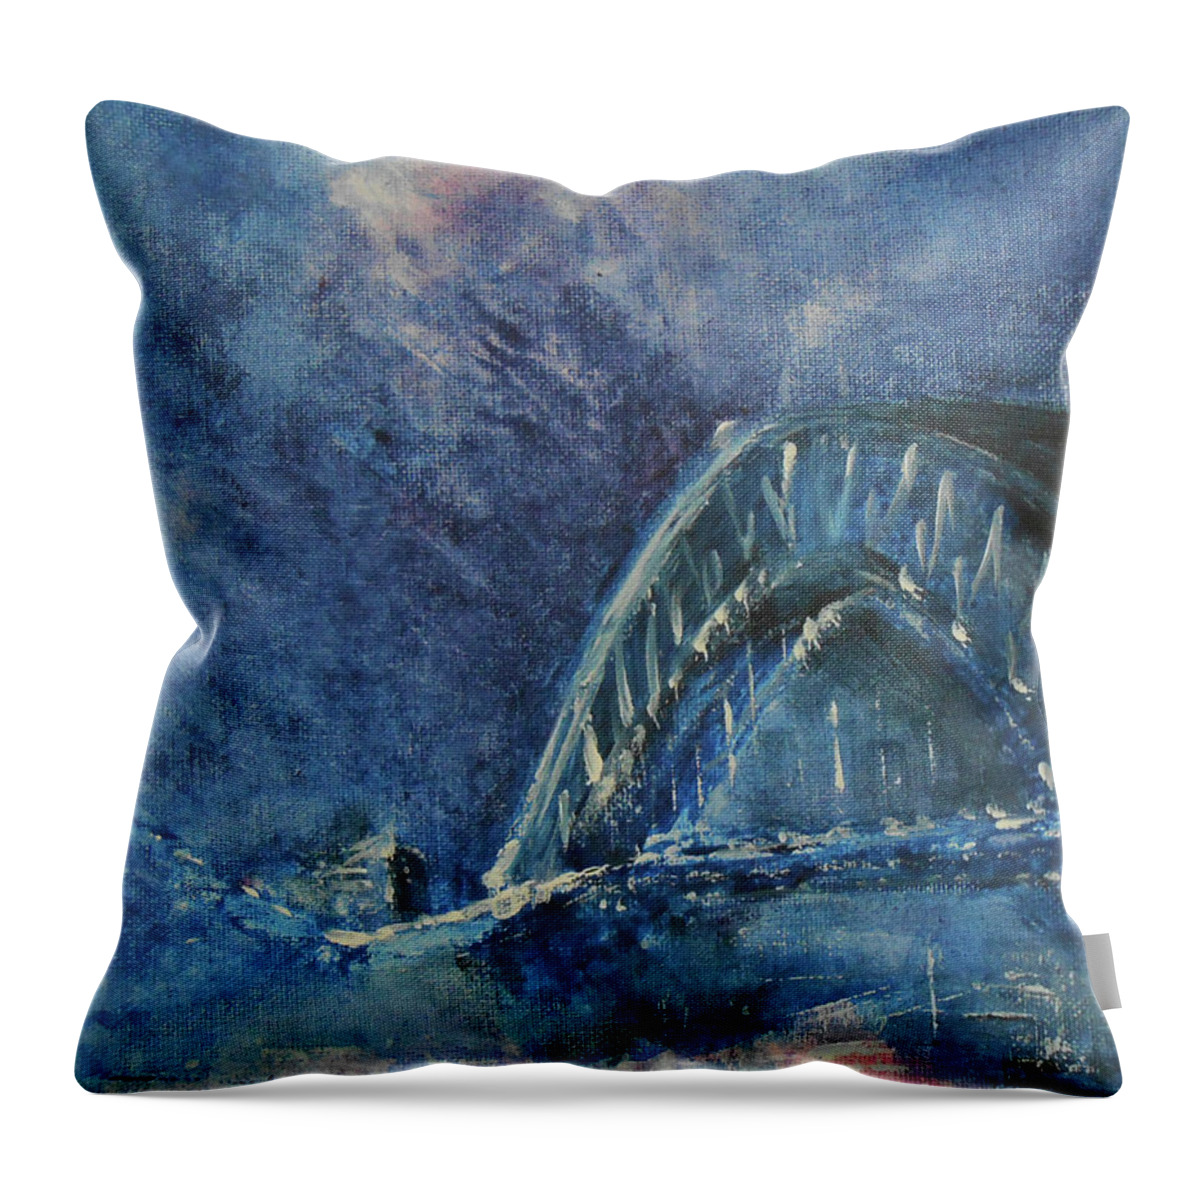 Abstract Throw Pillow featuring the painting Bridge To All Dreams by Jane See